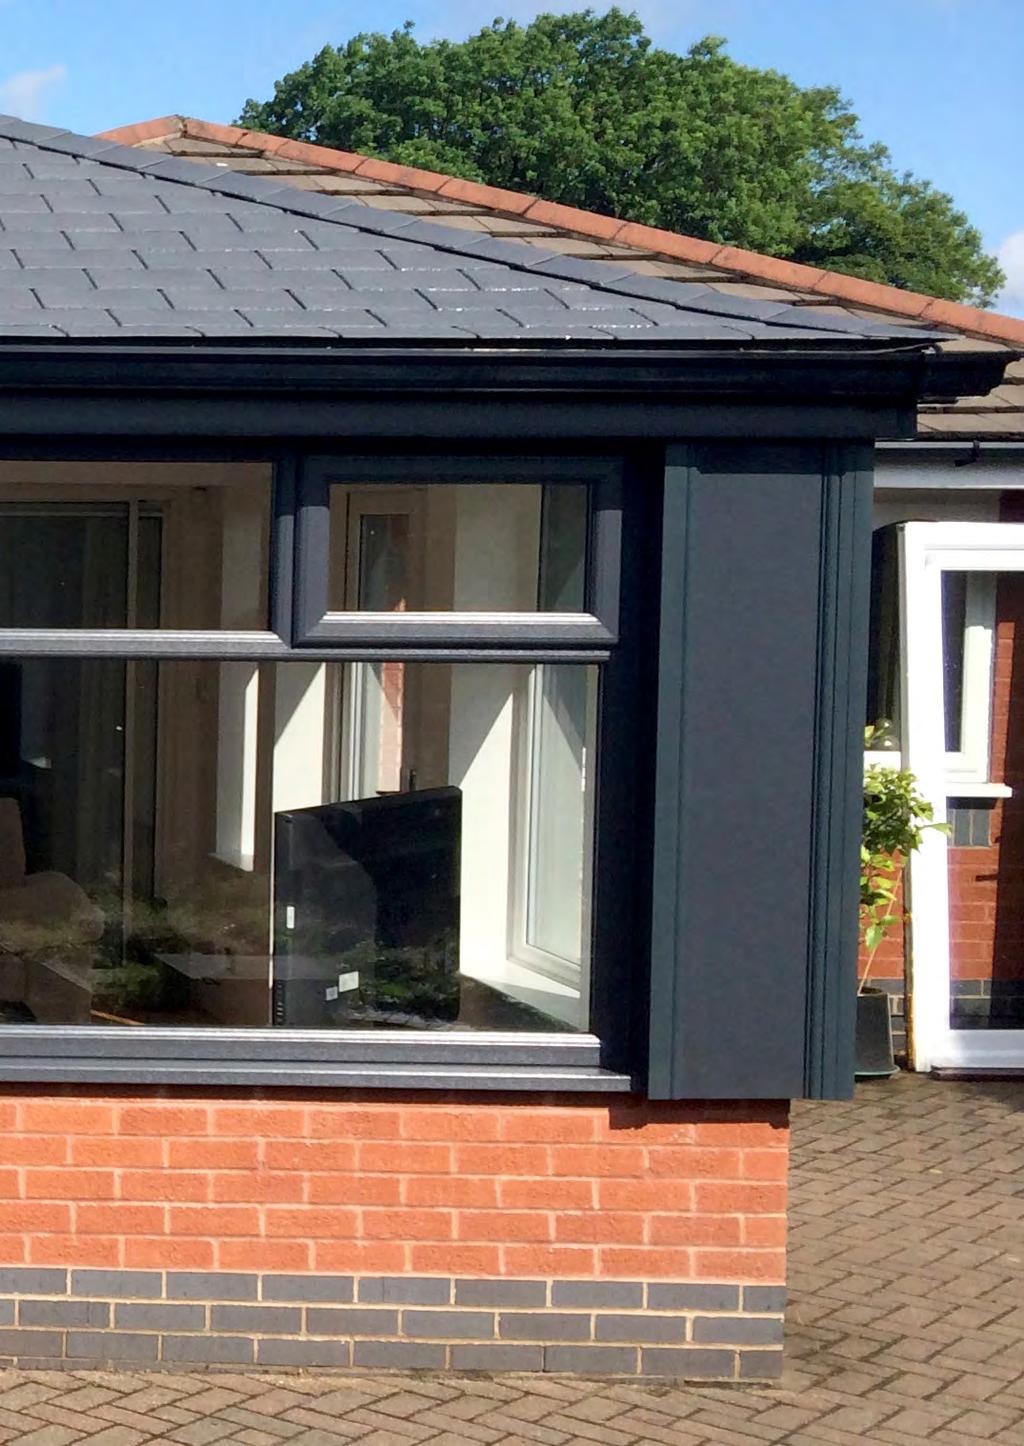 Building Control Approved System The Iconic Garden Room is a fully